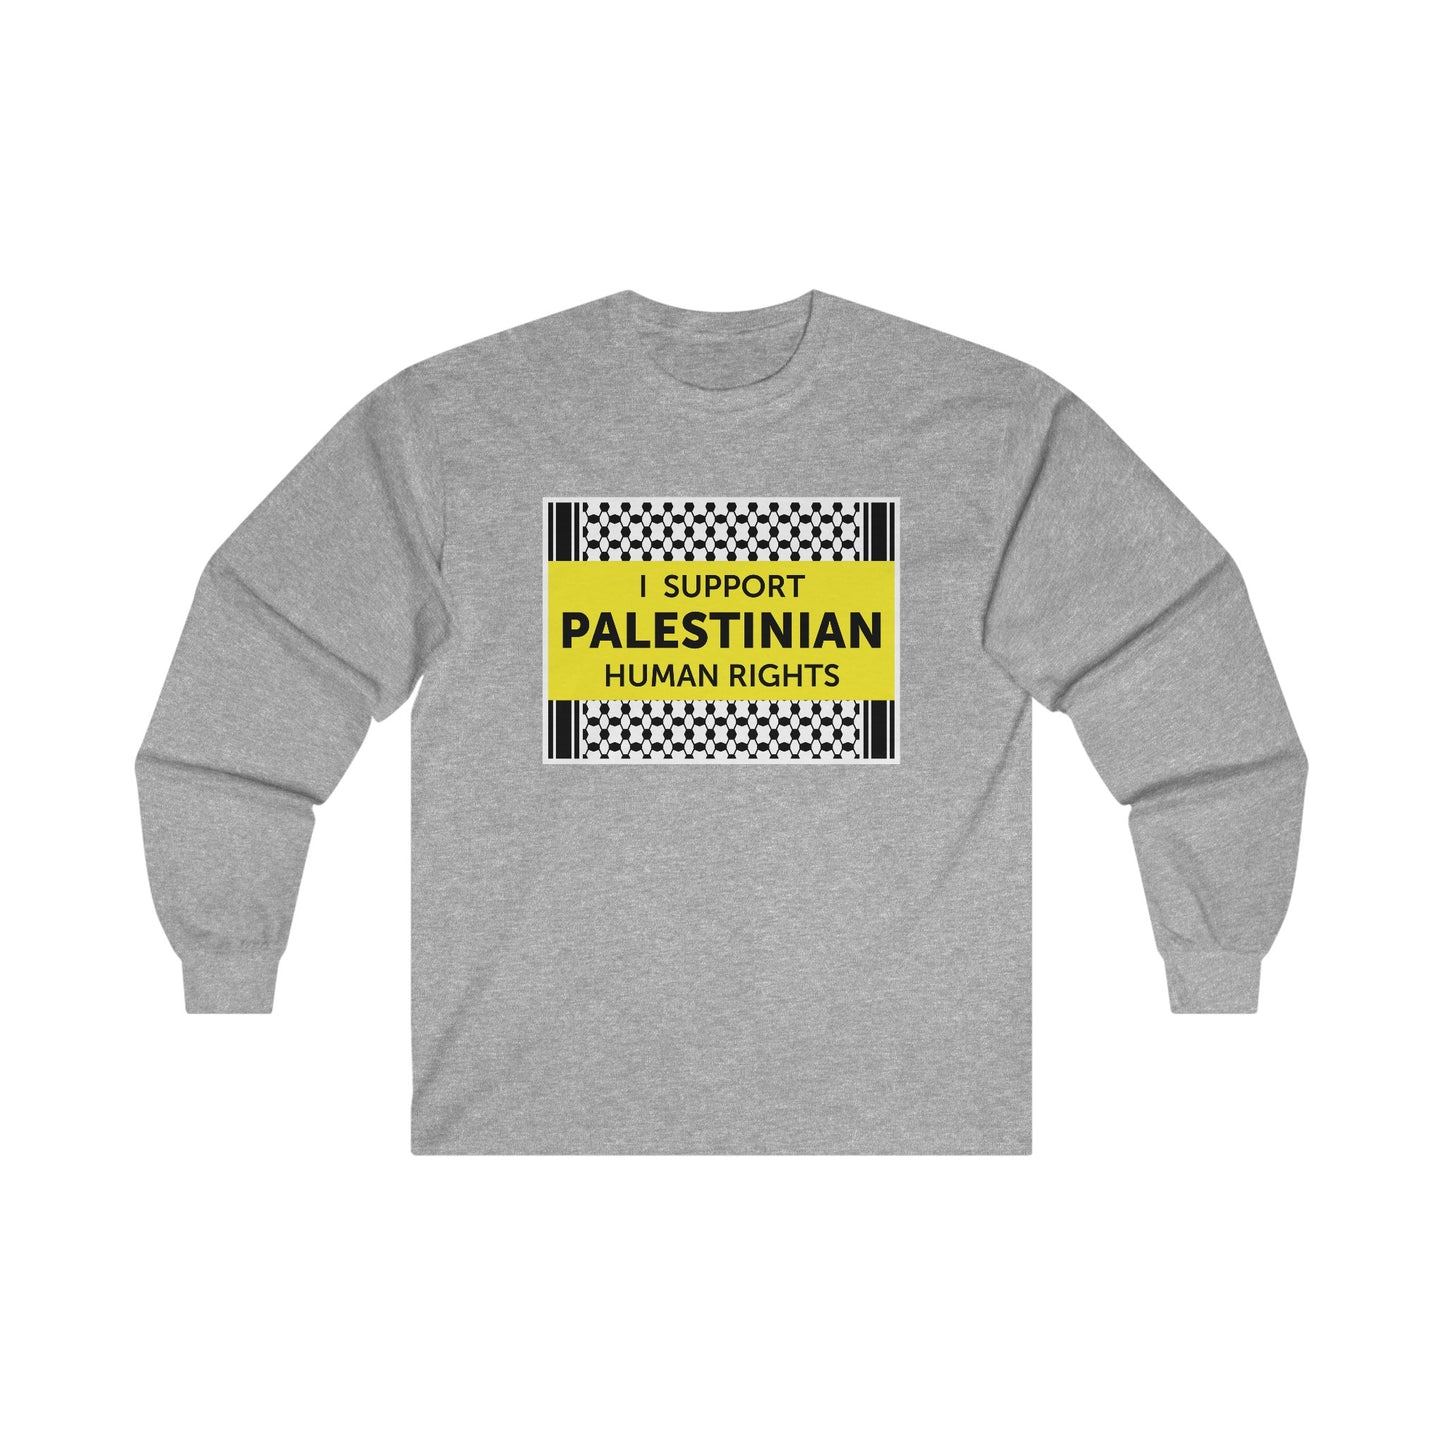 “I Support Palestinian Human Rights” Unisex Long Sleeve T-Shirt